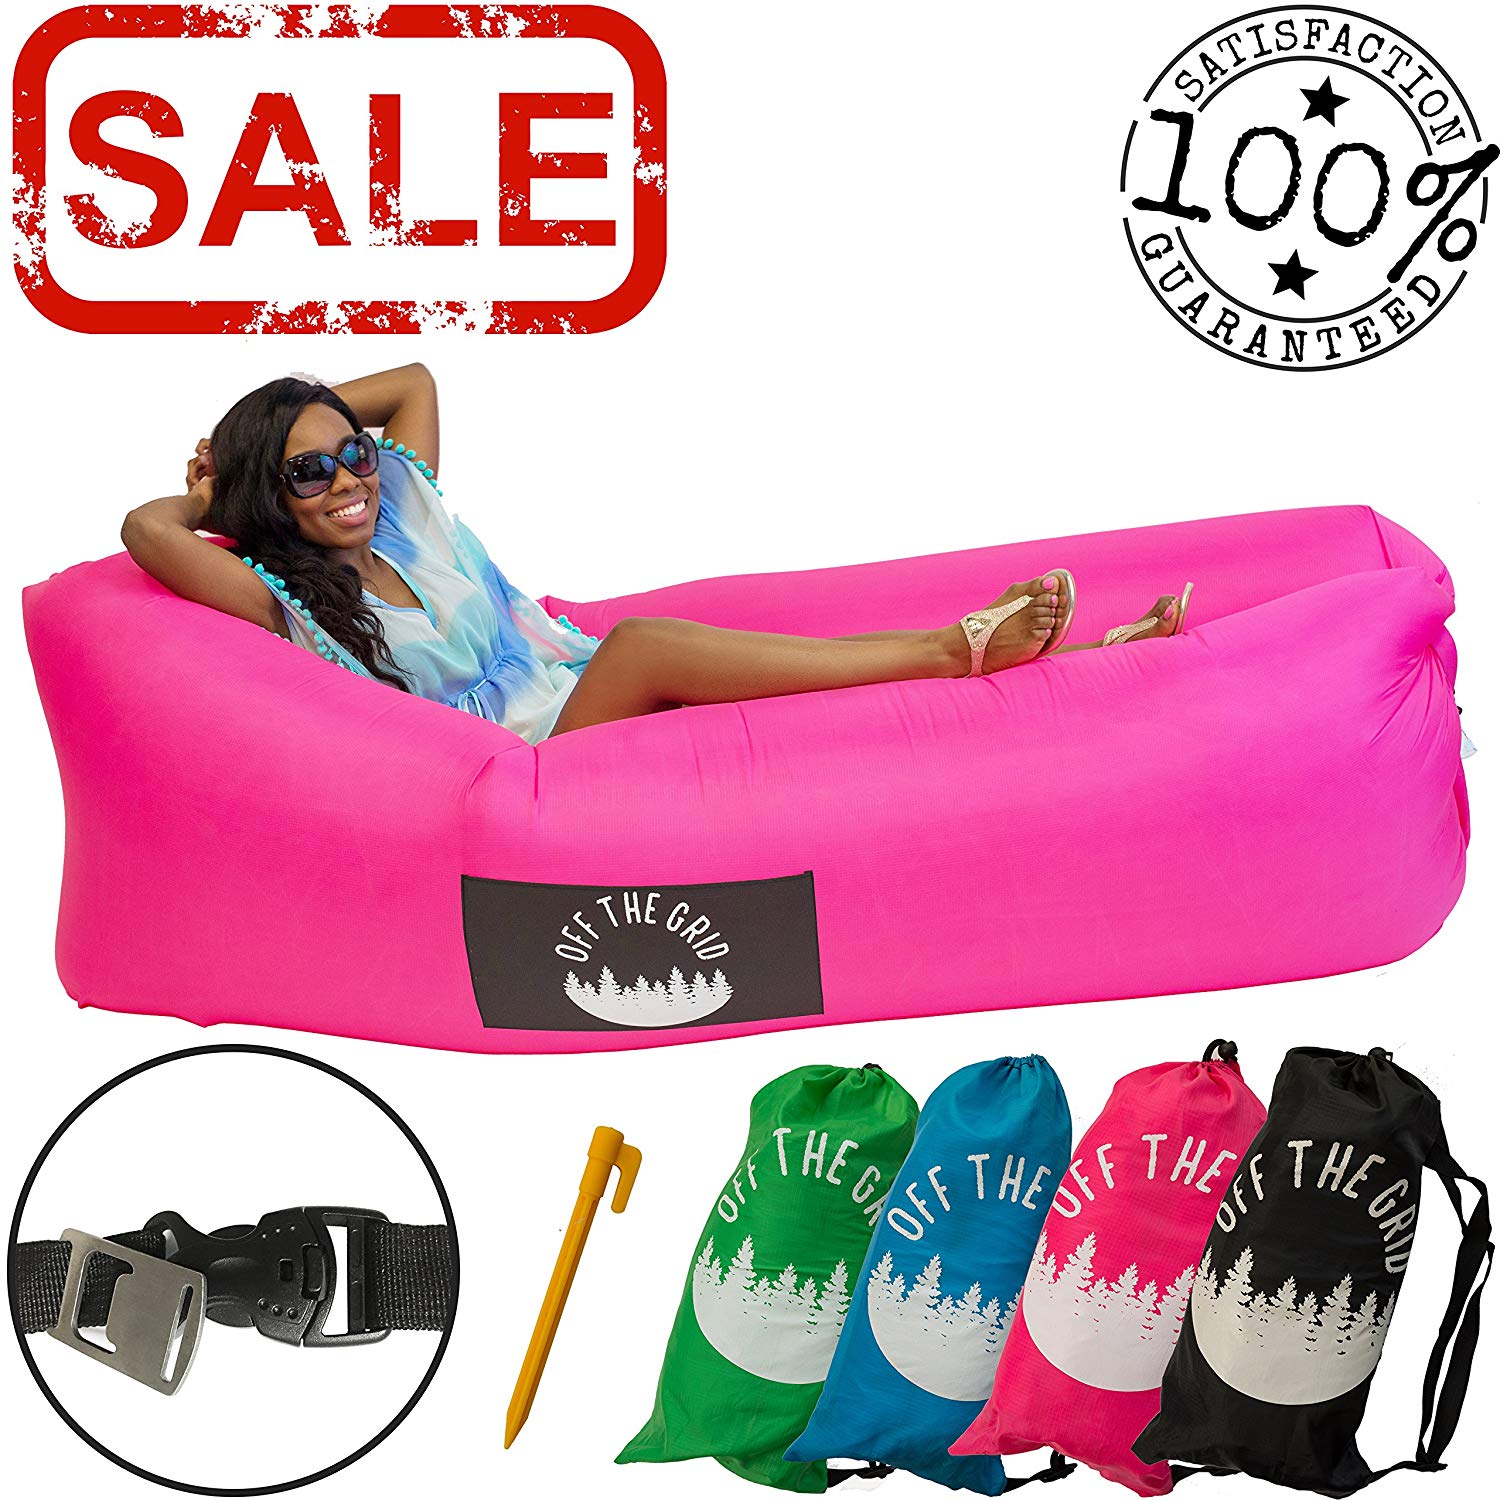 Review of Off the Grid Inflatable Lounger - Air Sofa Wind Chair Hammock - Floating/Portable Bed